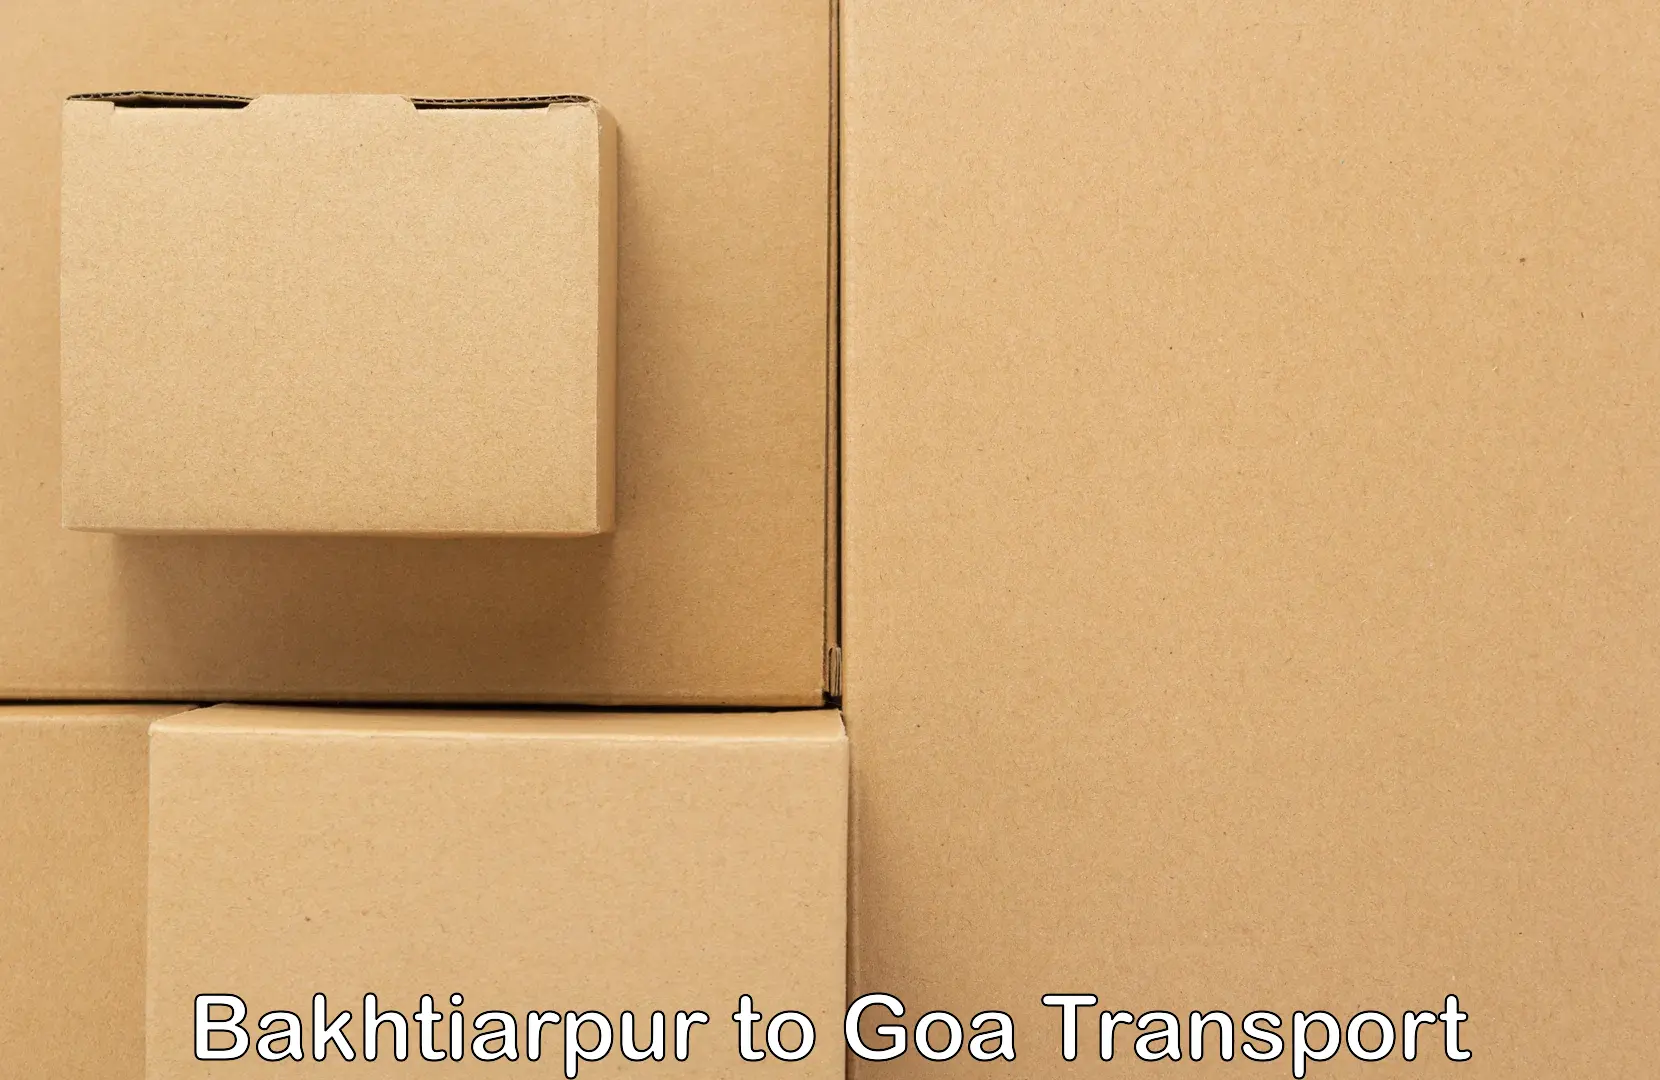 Transport bike from one state to another Bakhtiarpur to Mormugao Port